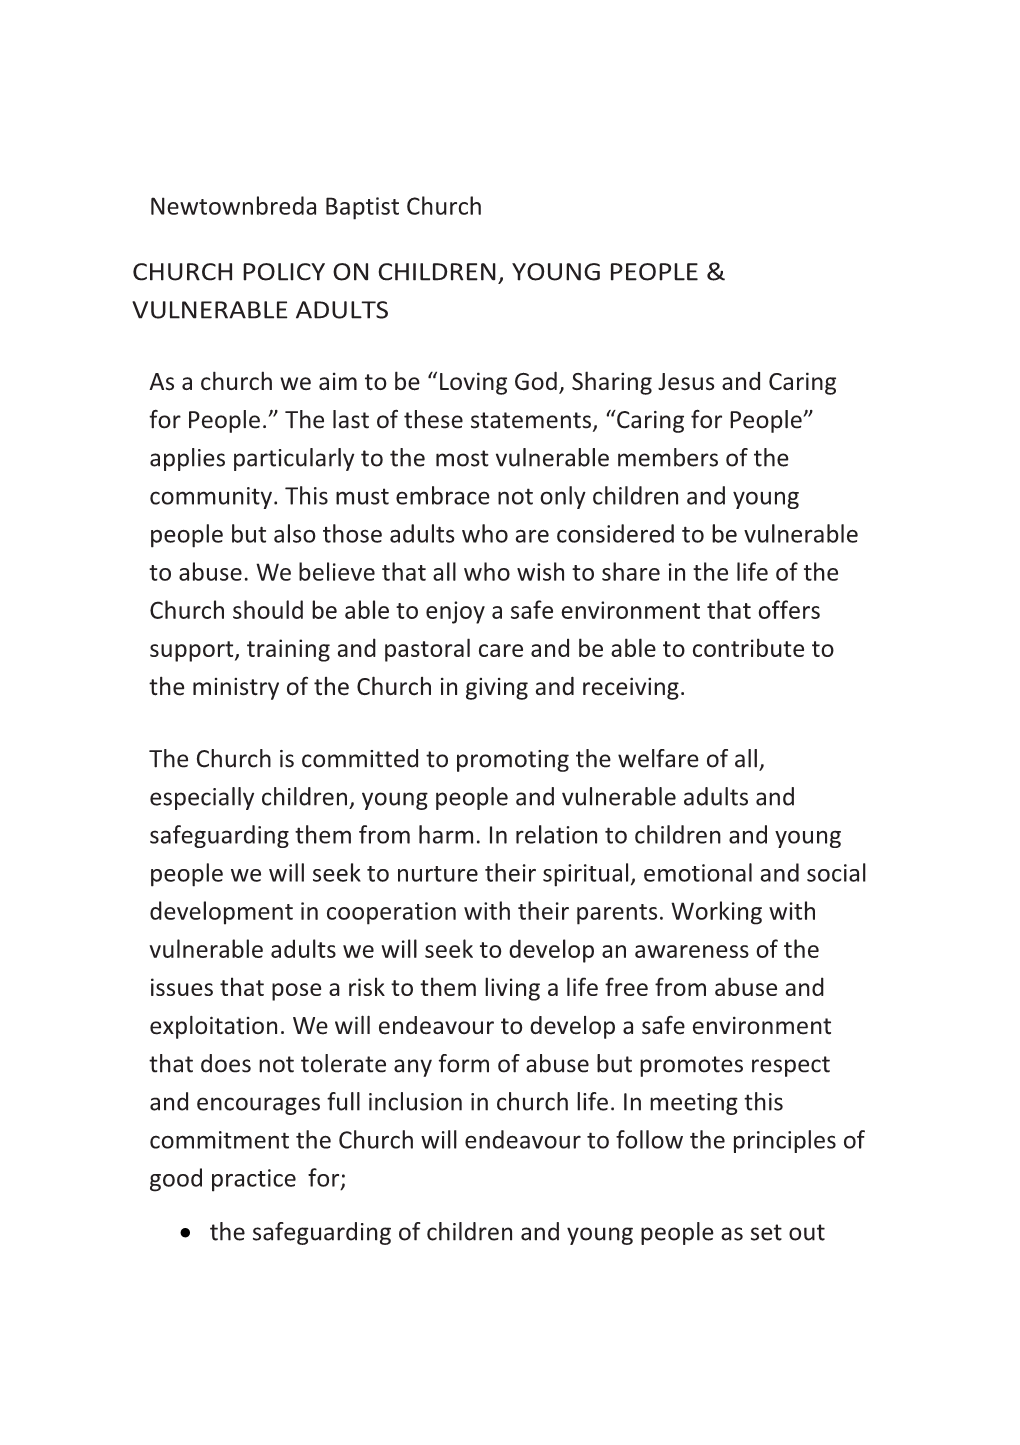 Church Policy on Children, Young People & Vulnerable Adults